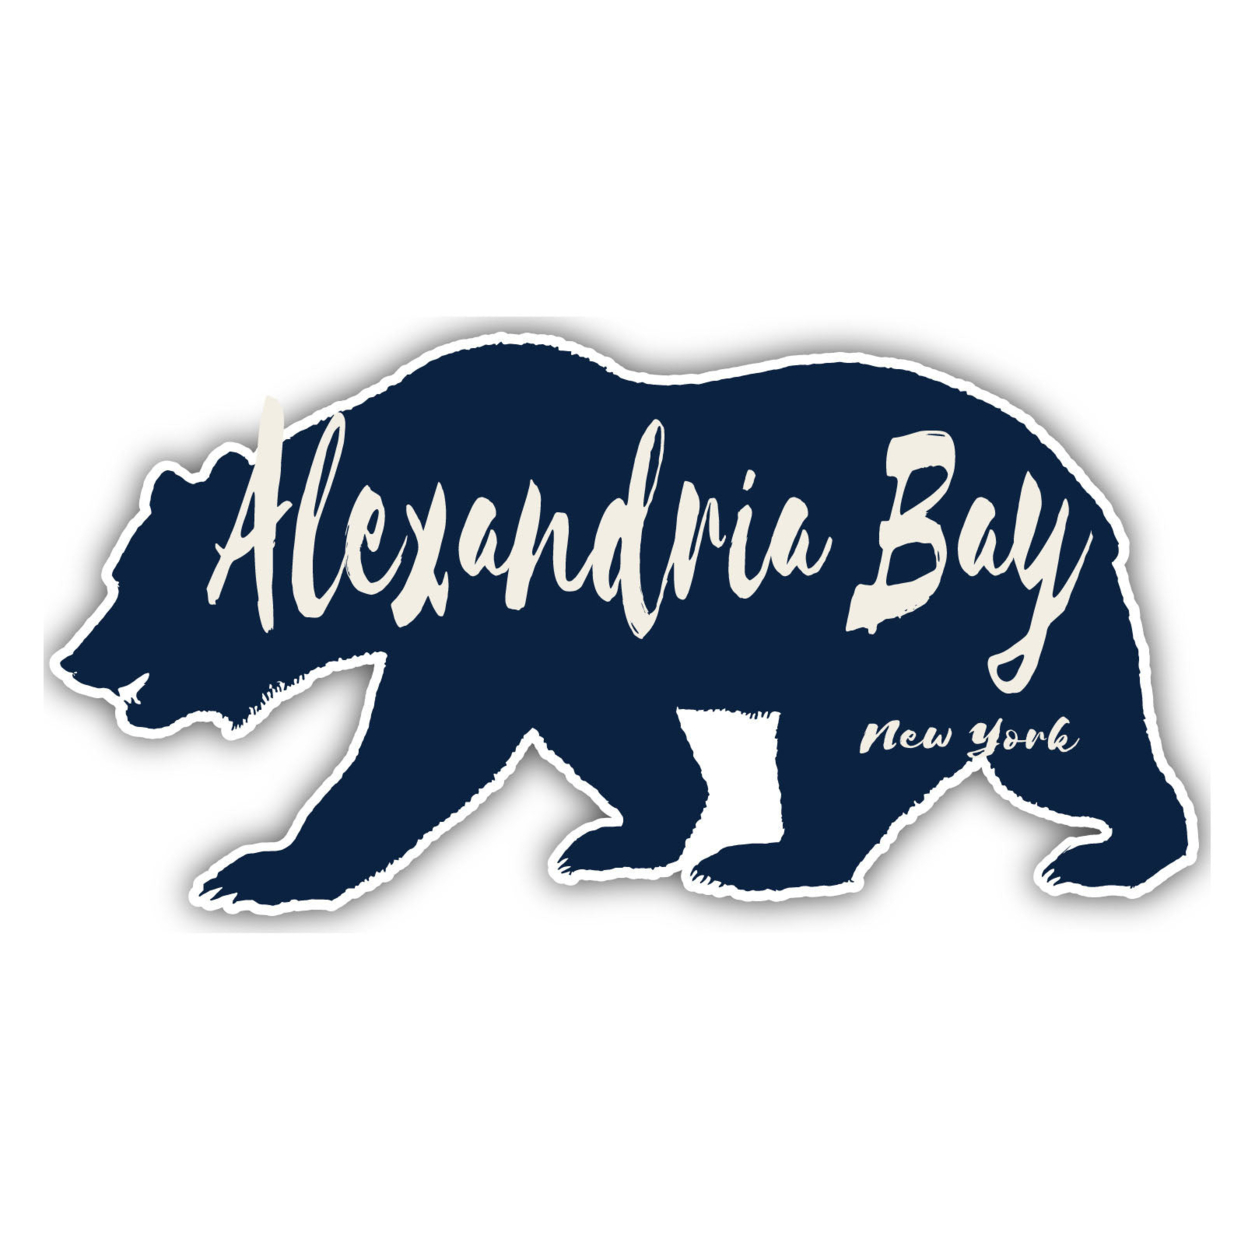 Alexandria Bay New York Souvenir Decorative Stickers (Choose Theme And Size) - 4-Pack, 6-Inch, Tent